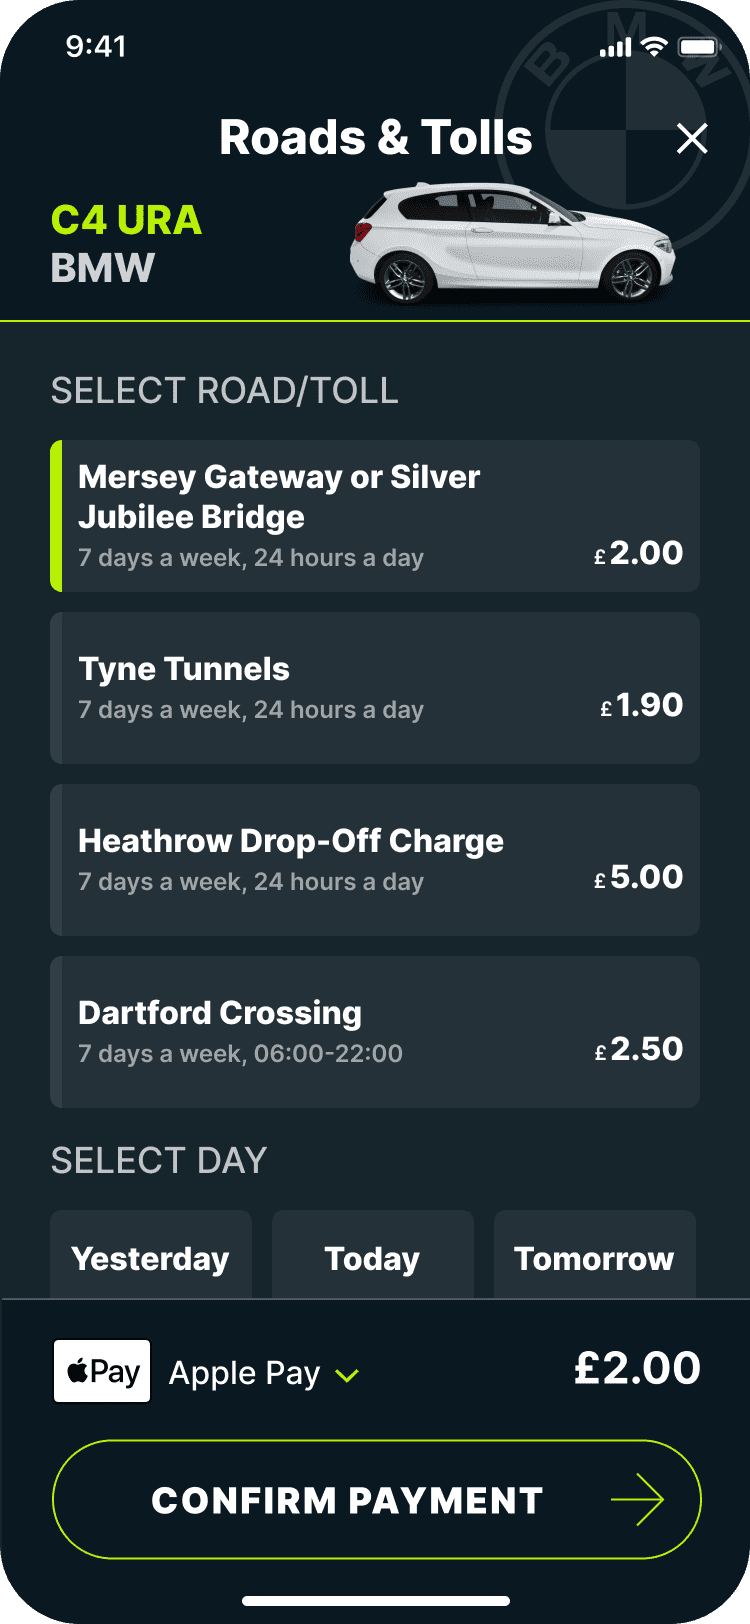 Merseyflow toll charge in Caura